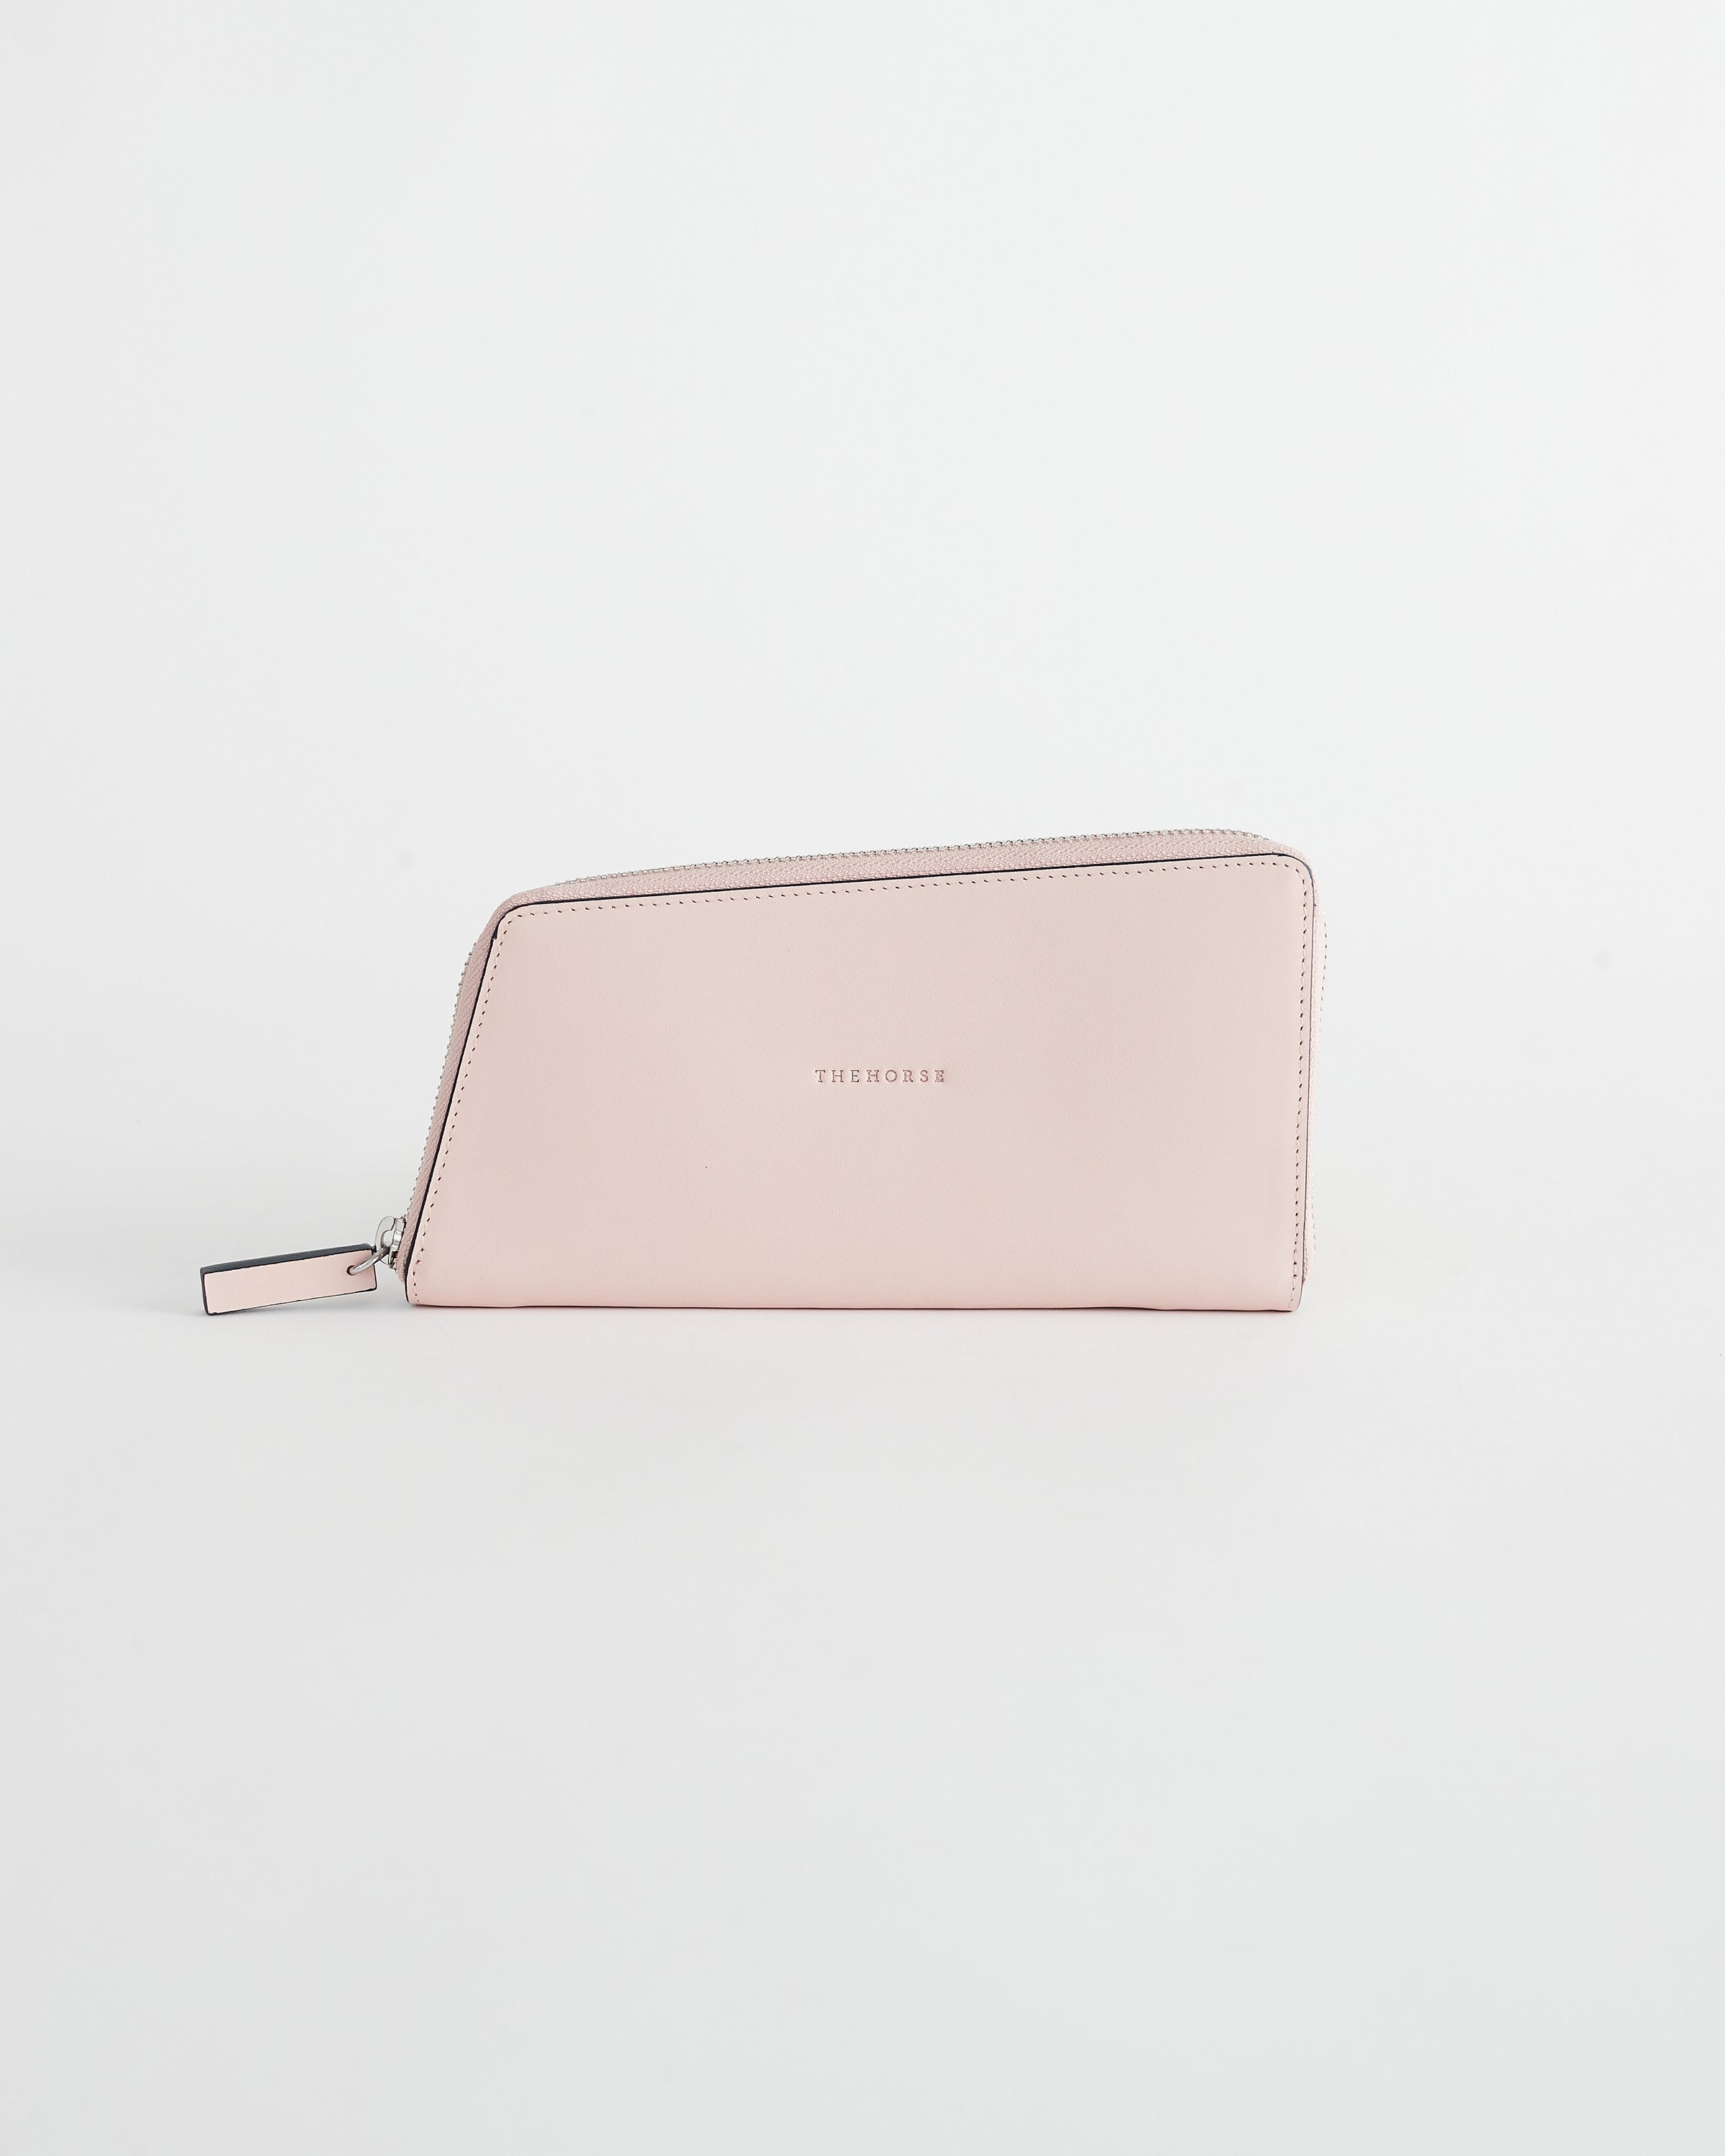 The Freddie Continental Large Zip Wallet in Pink by The Horse®